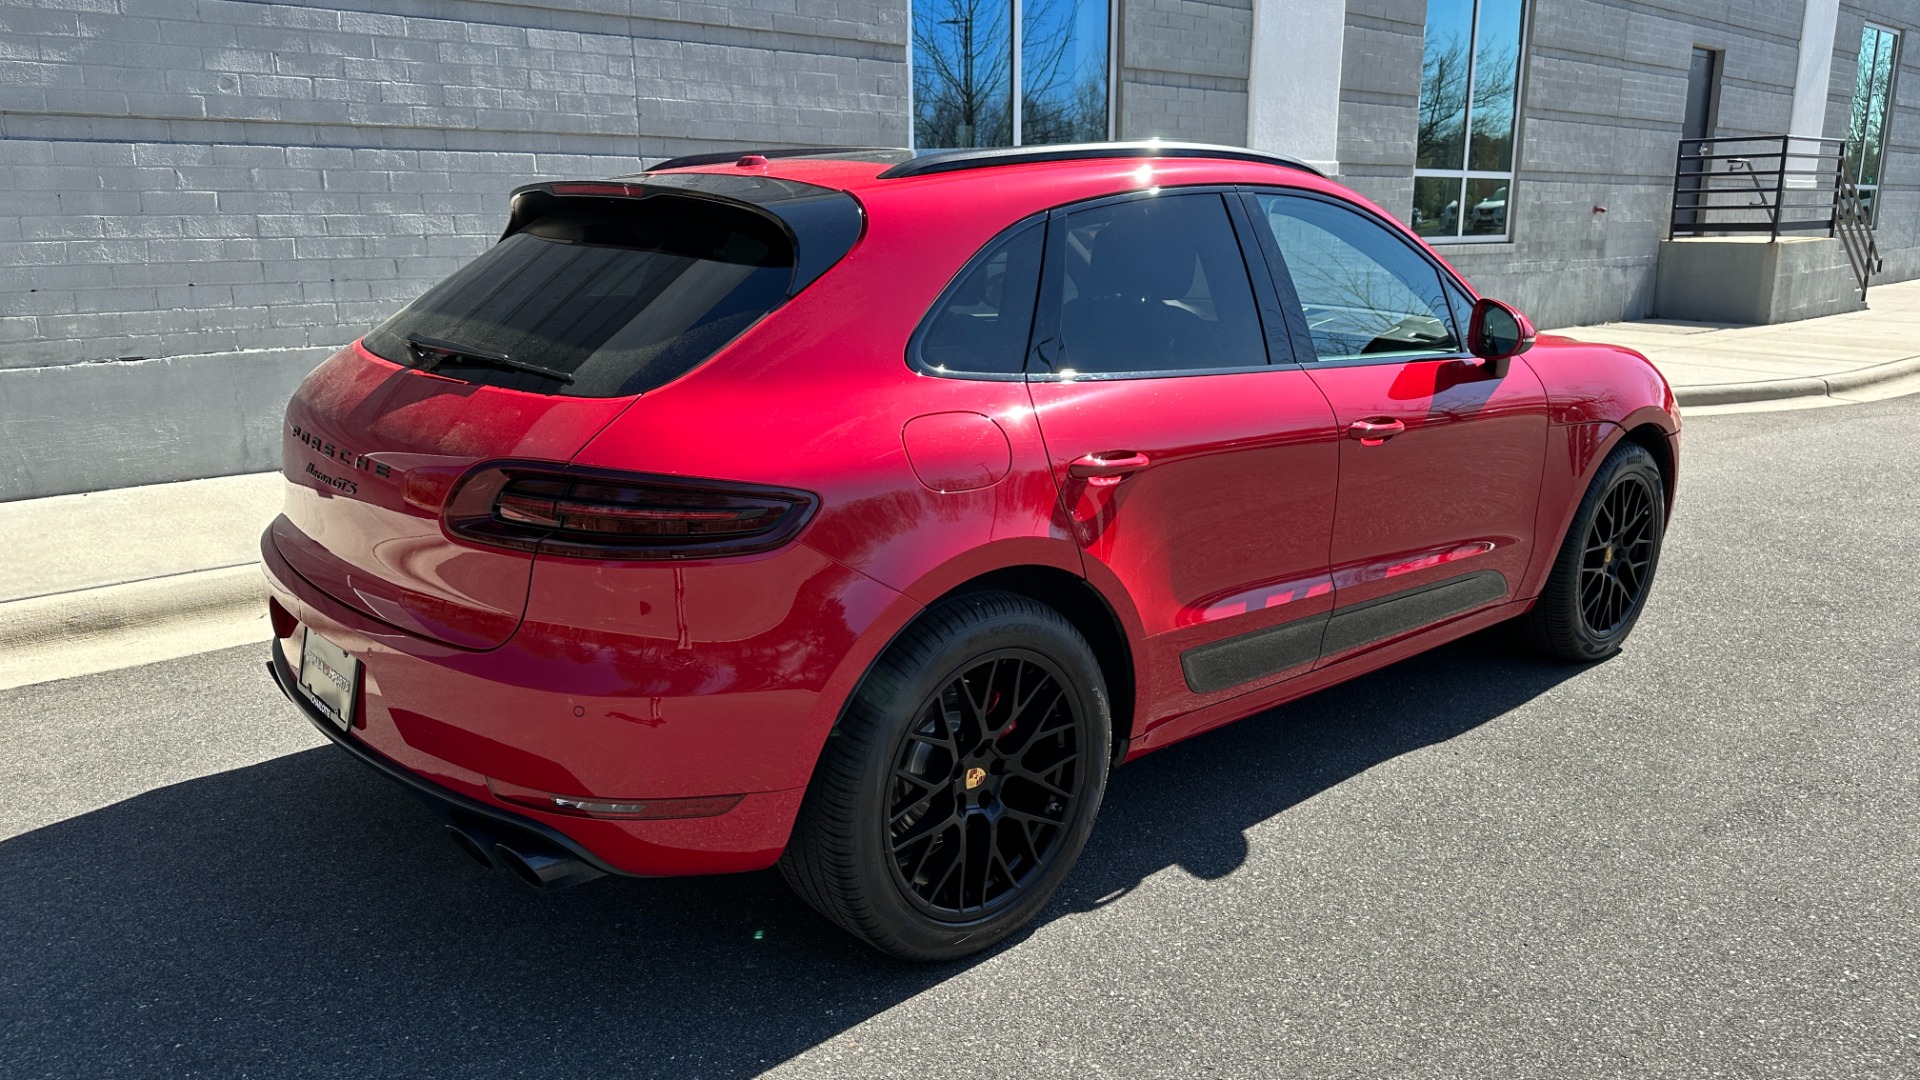 Used 2017 Porsche Macan GTS / CARBON FIBER / GTS INTERIOR / DYNAMIC LIGHTS / BOSE / SPORT WHEEL for sale Sold at Formula Imports in Charlotte NC 28227 4